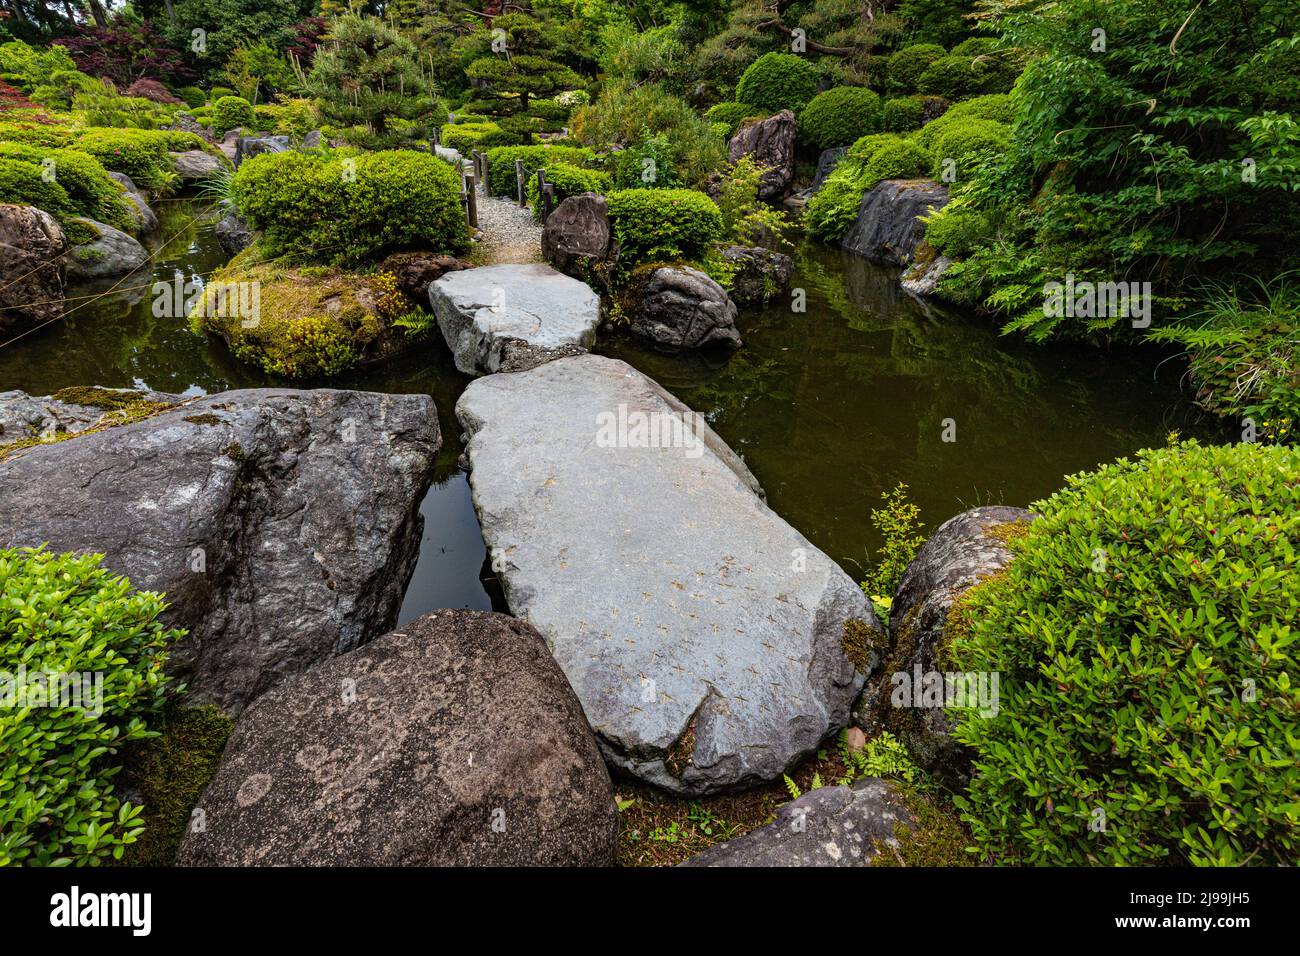 Hisuien Jade Garden  - A 70 ton boulder of cobalt jade greets you as you enter the gate to this beautifully-landscaped Japanese garden. The site area Stock Photo